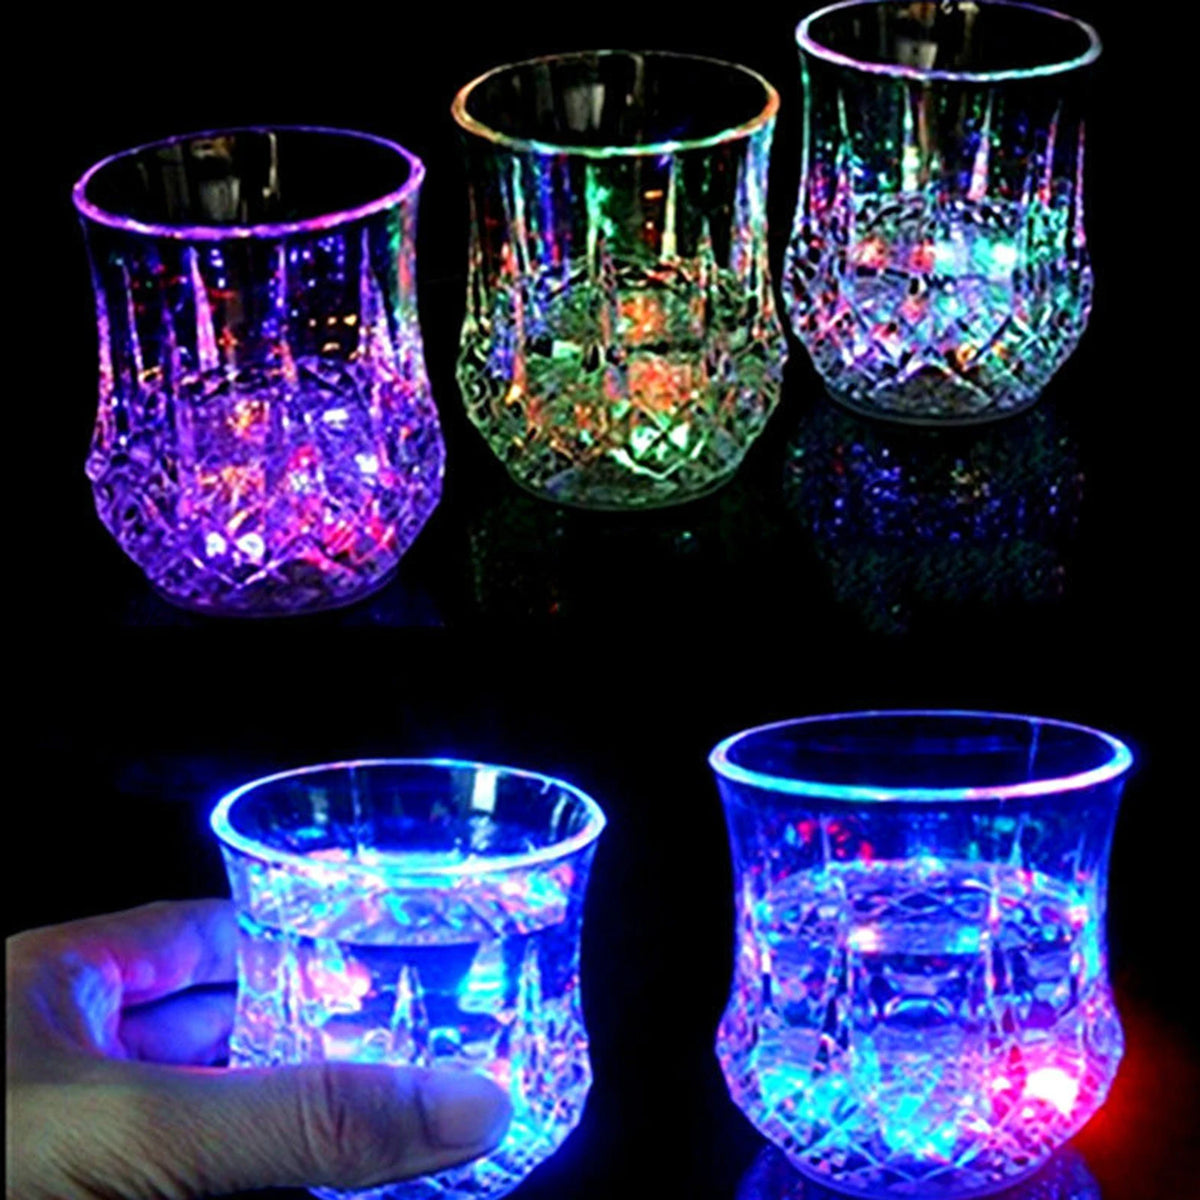 a hand is holding a lit up glass